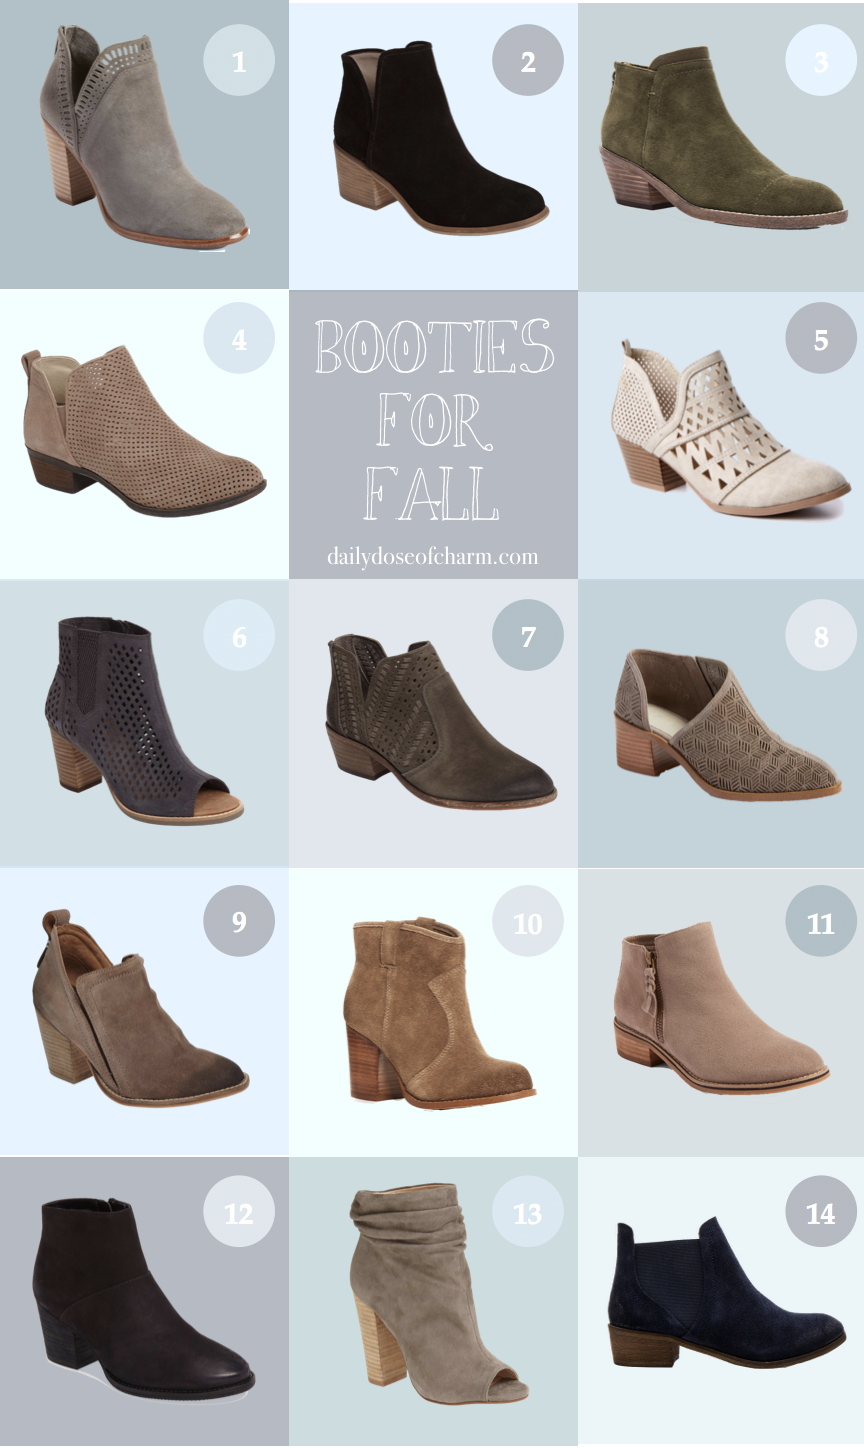 My Favorite Booties for Fall | Daily 